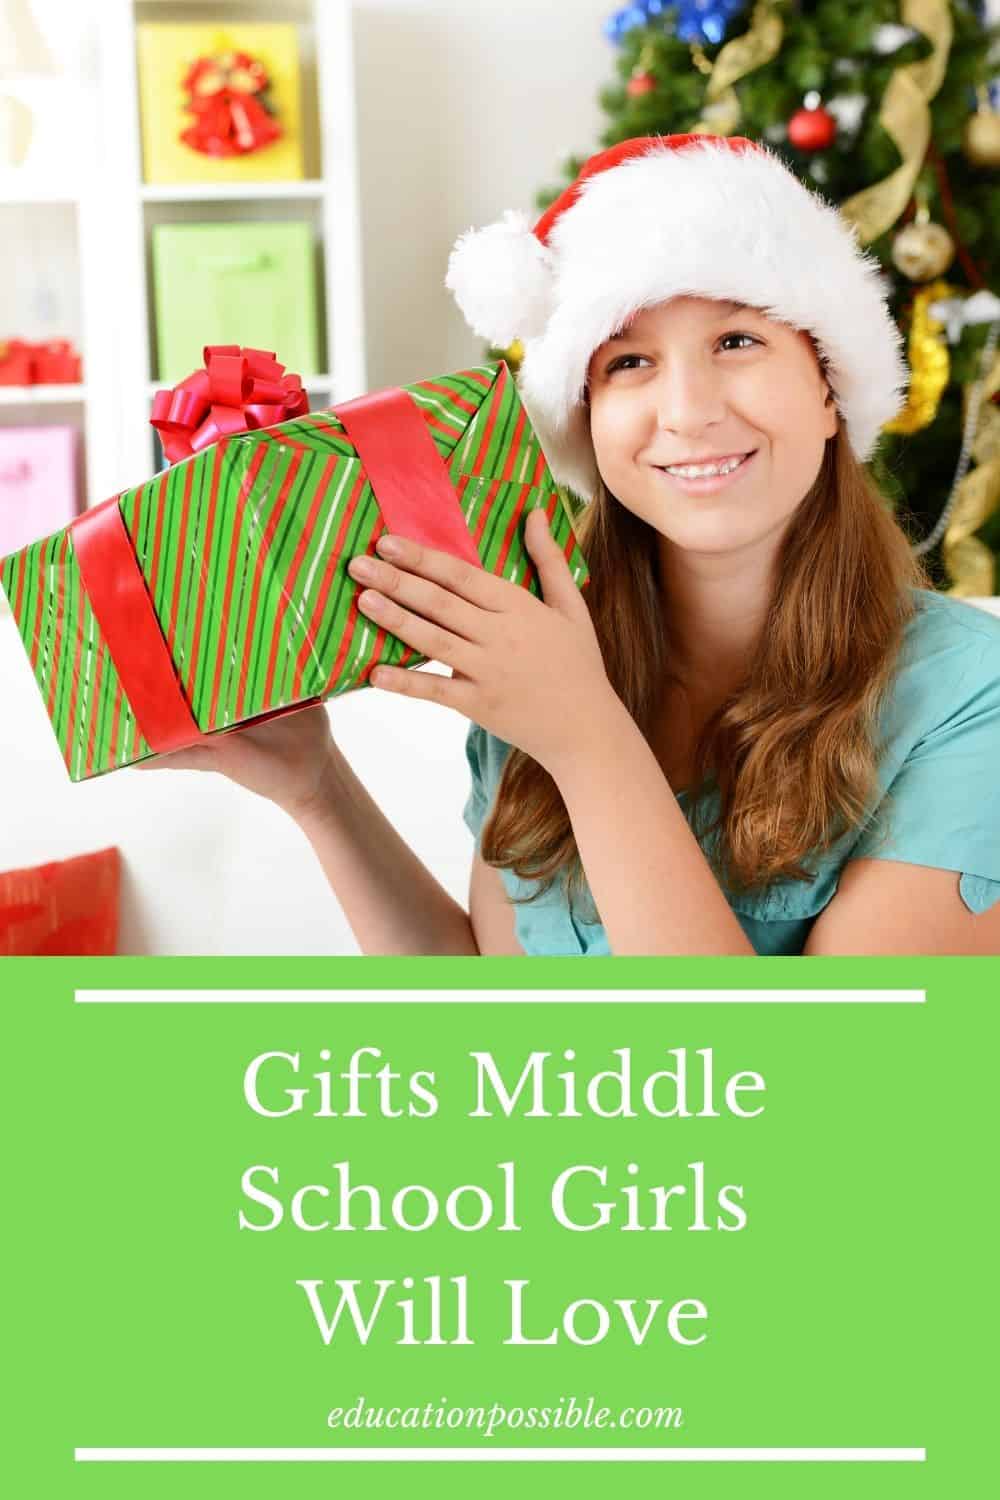 Gifts for Middle School Girls They’ll Absolutely Love